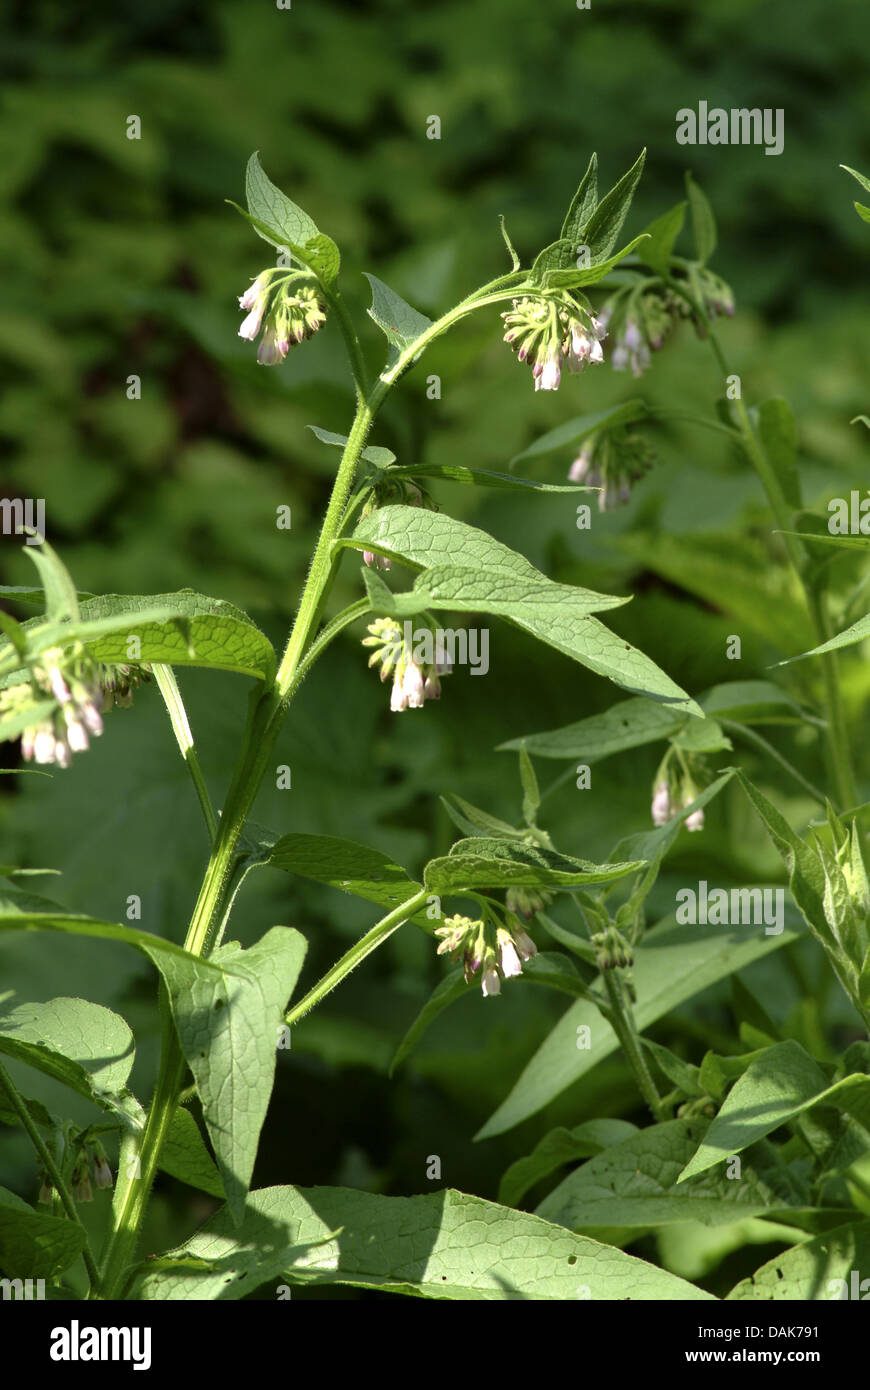 Russian comfrey (Symphytum x uplandicum), blooming with humble bee, Germany Stock Photo